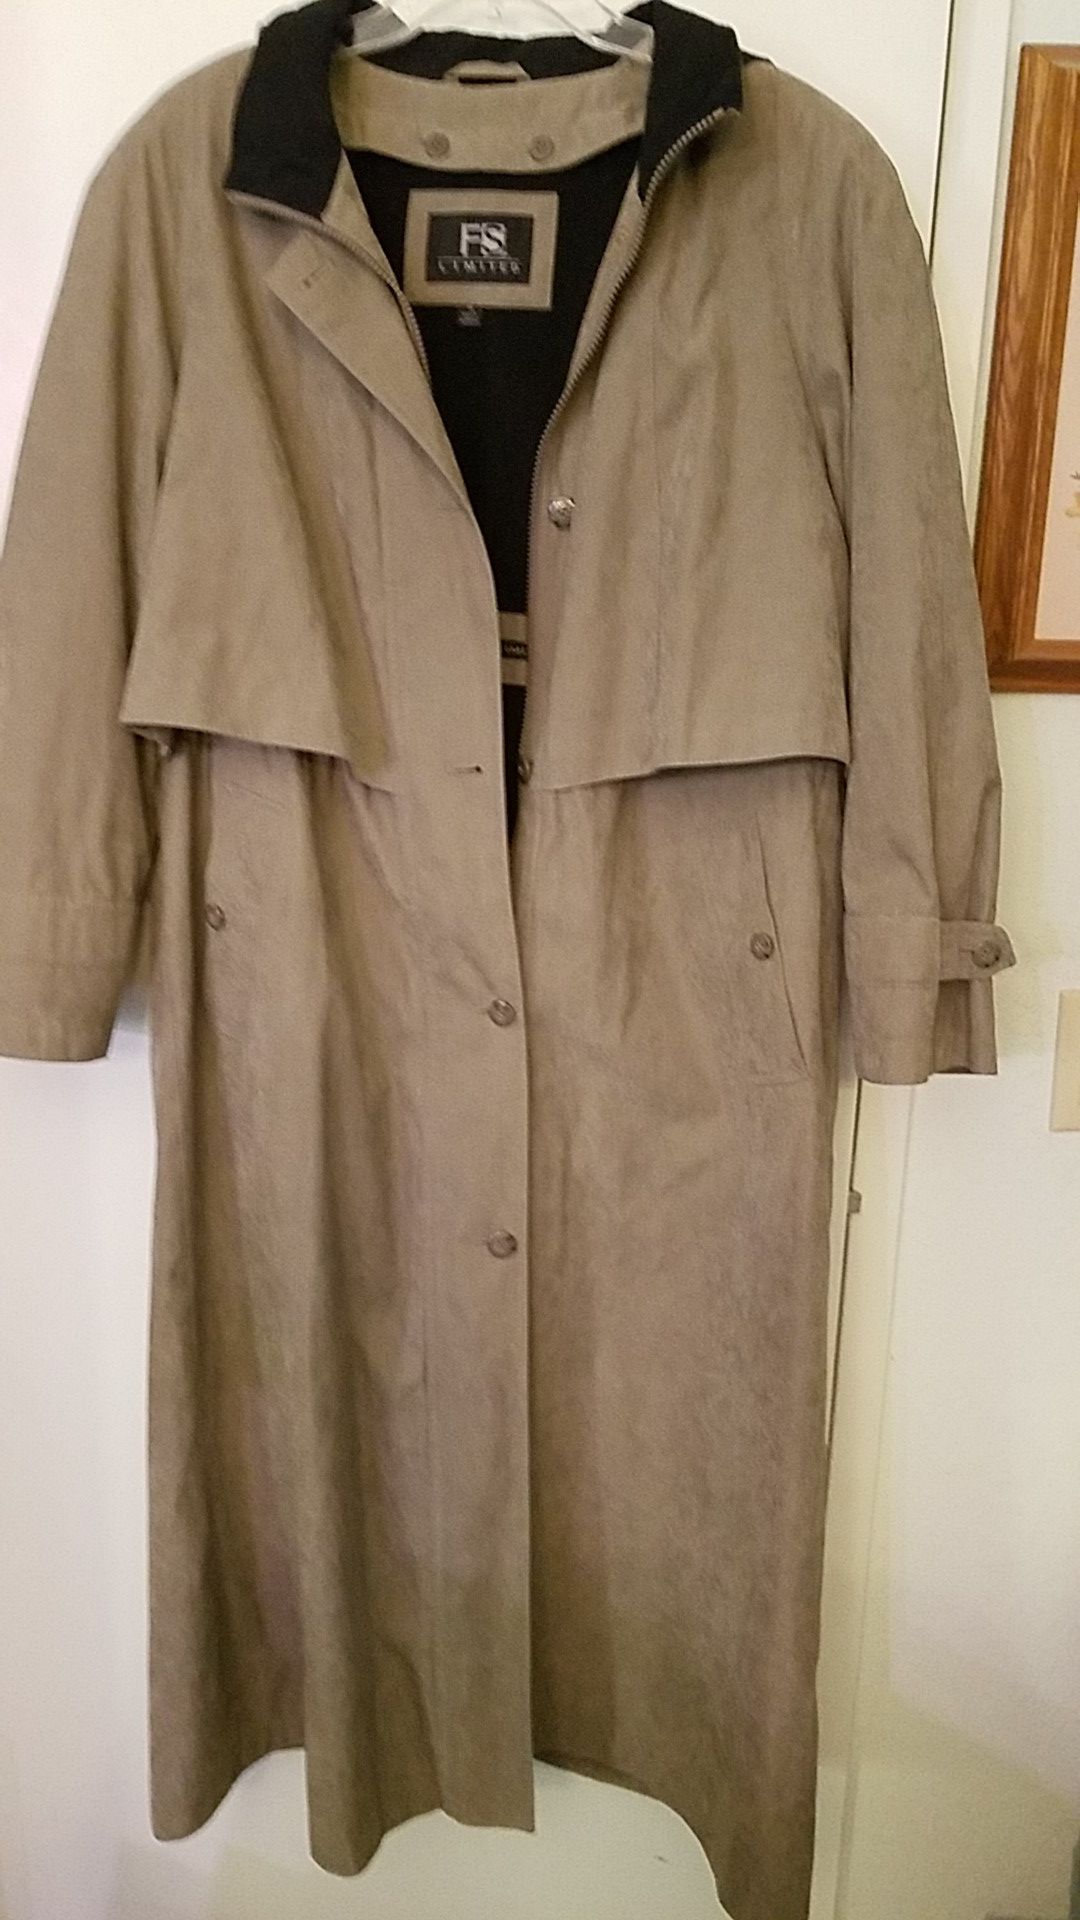 Raincoat with warm button out lining